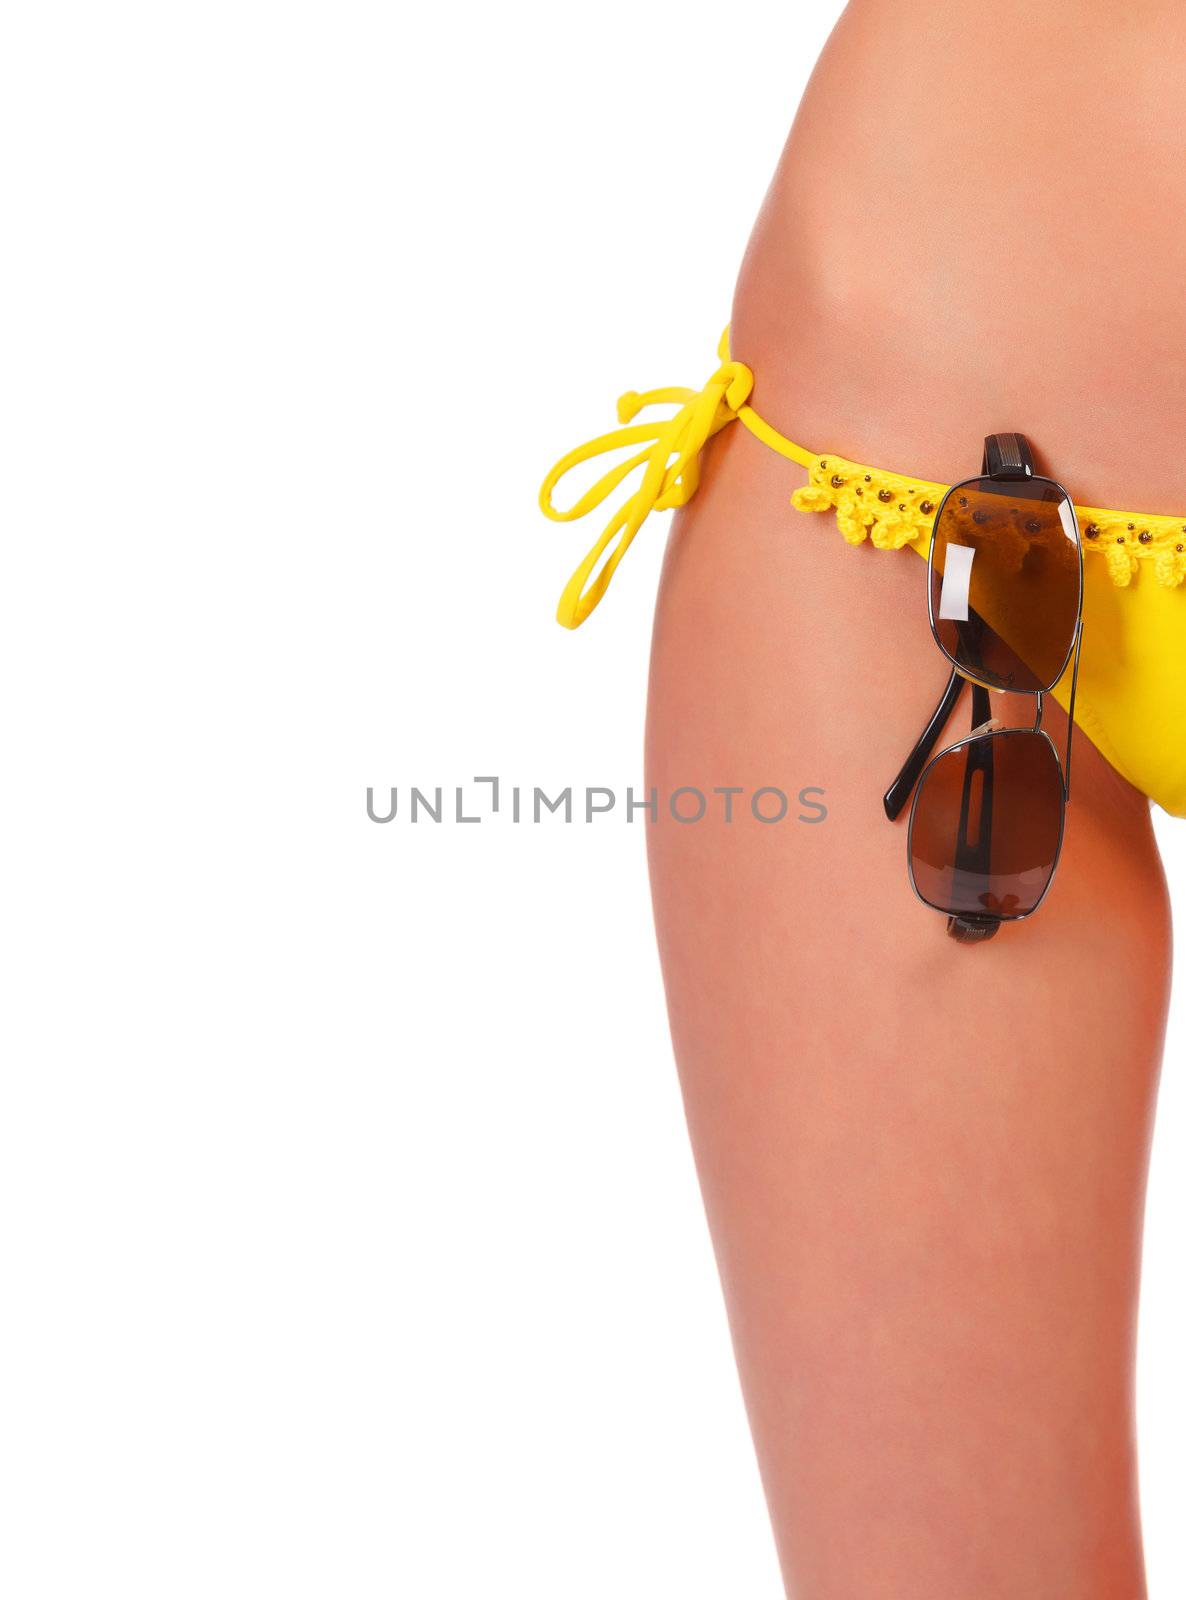 tanned woman body in bikini, isolated on white. focus is on the sunglasses.